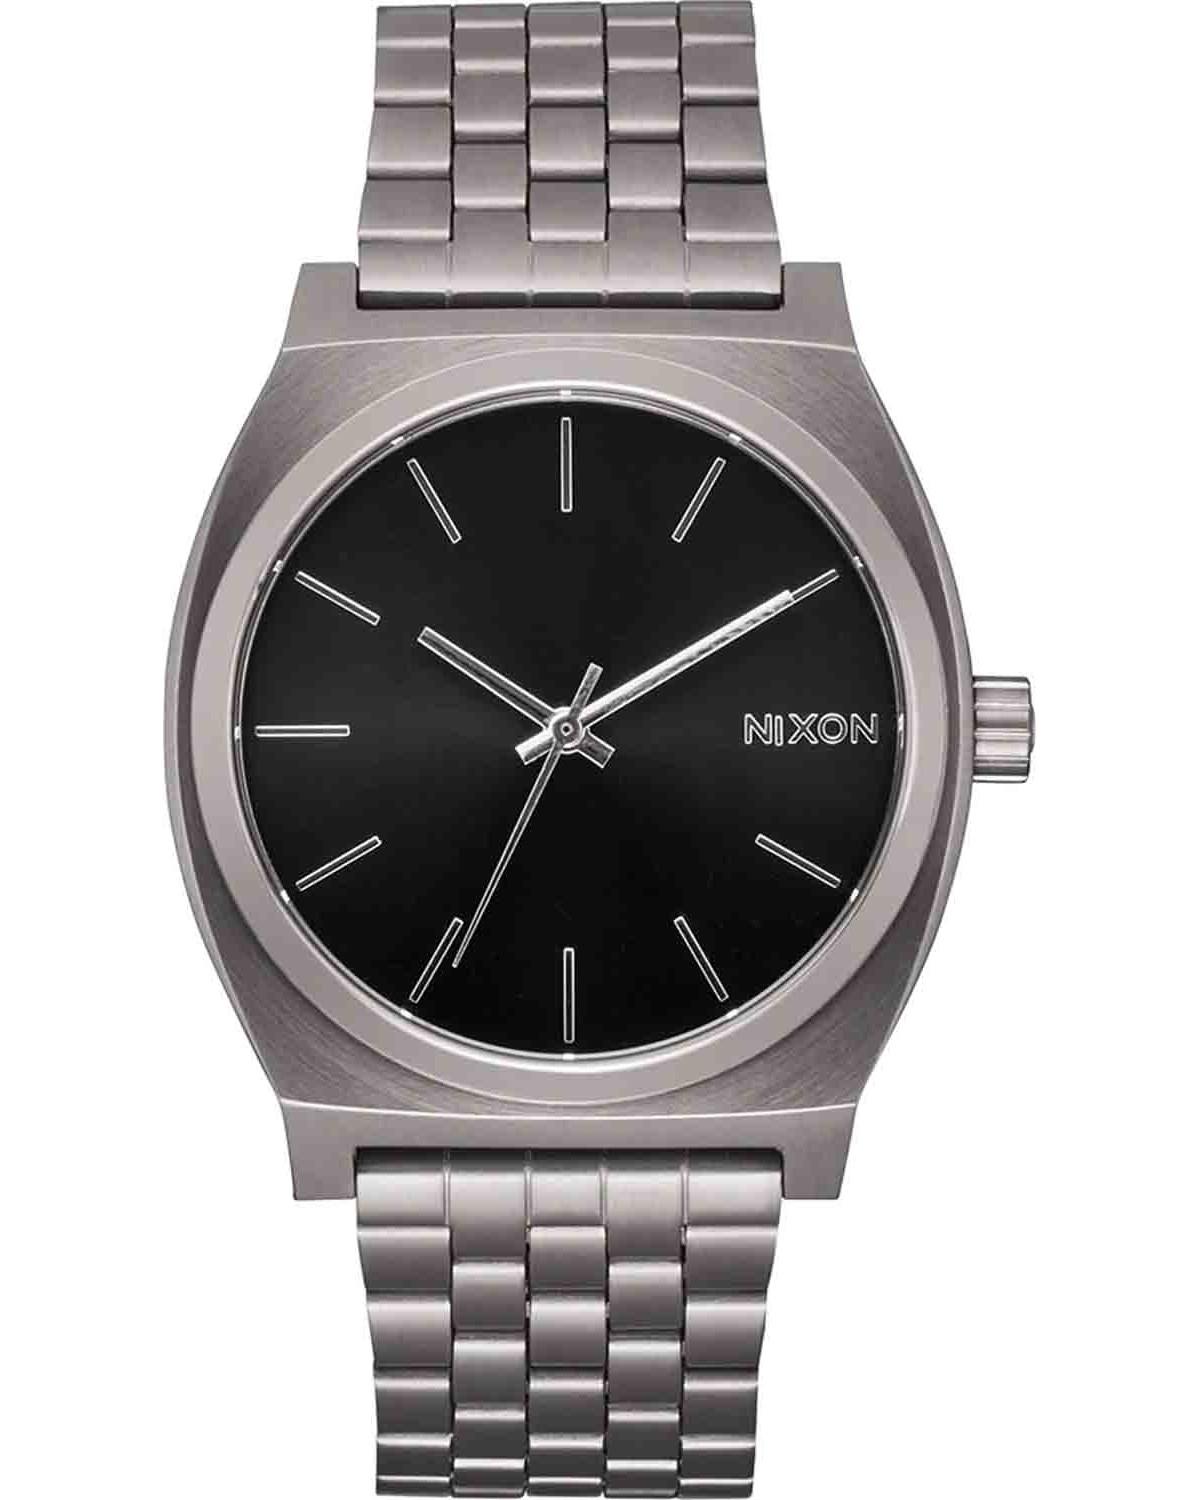 nixon time teller a045 5084 00 grey case with stainless steel bracelet image1